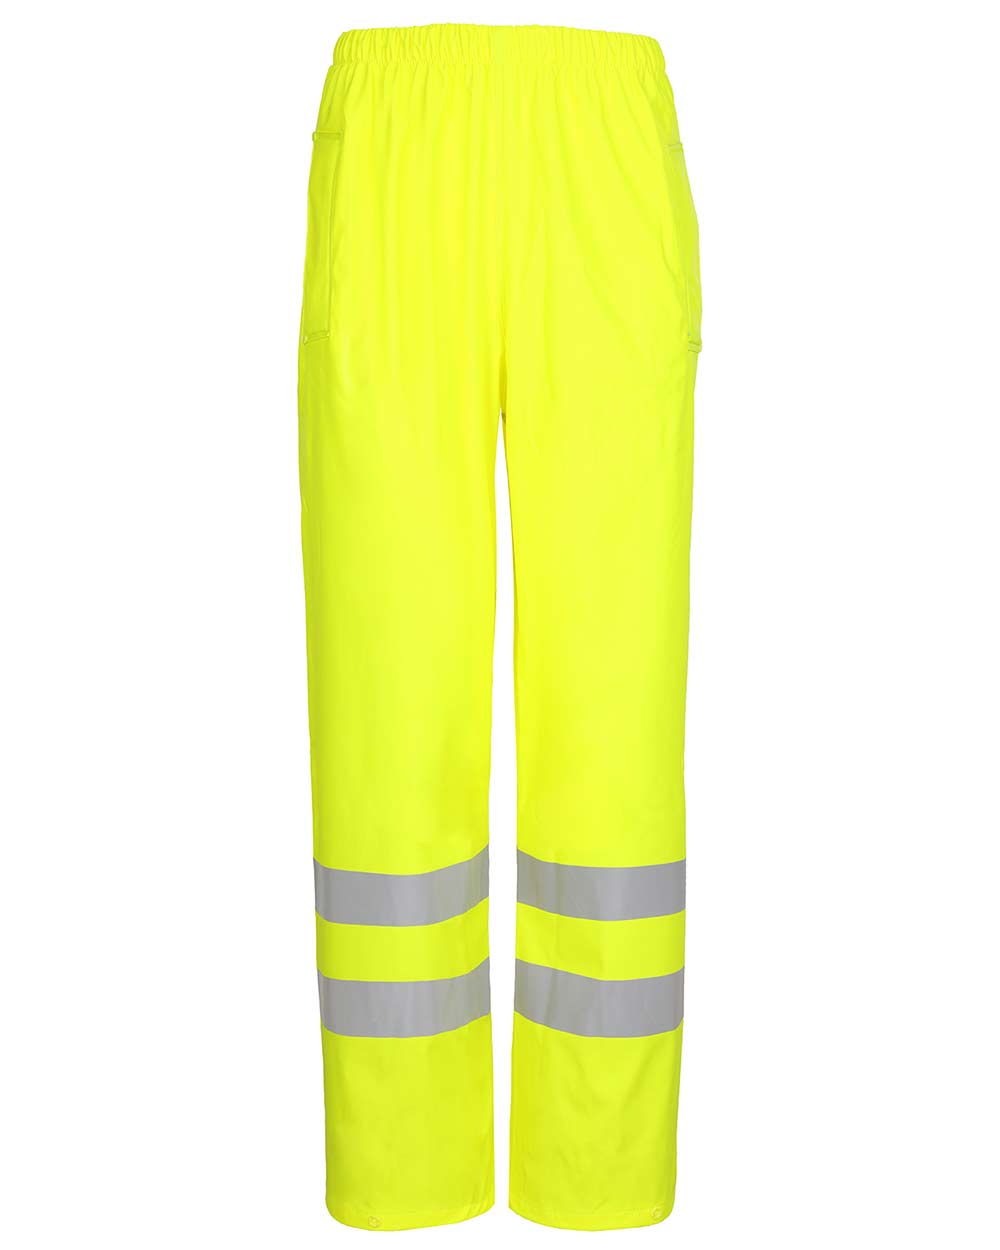 Front view Fort Mens Air Reflex Hi-Vis Trousers in yellow with Reflective strips